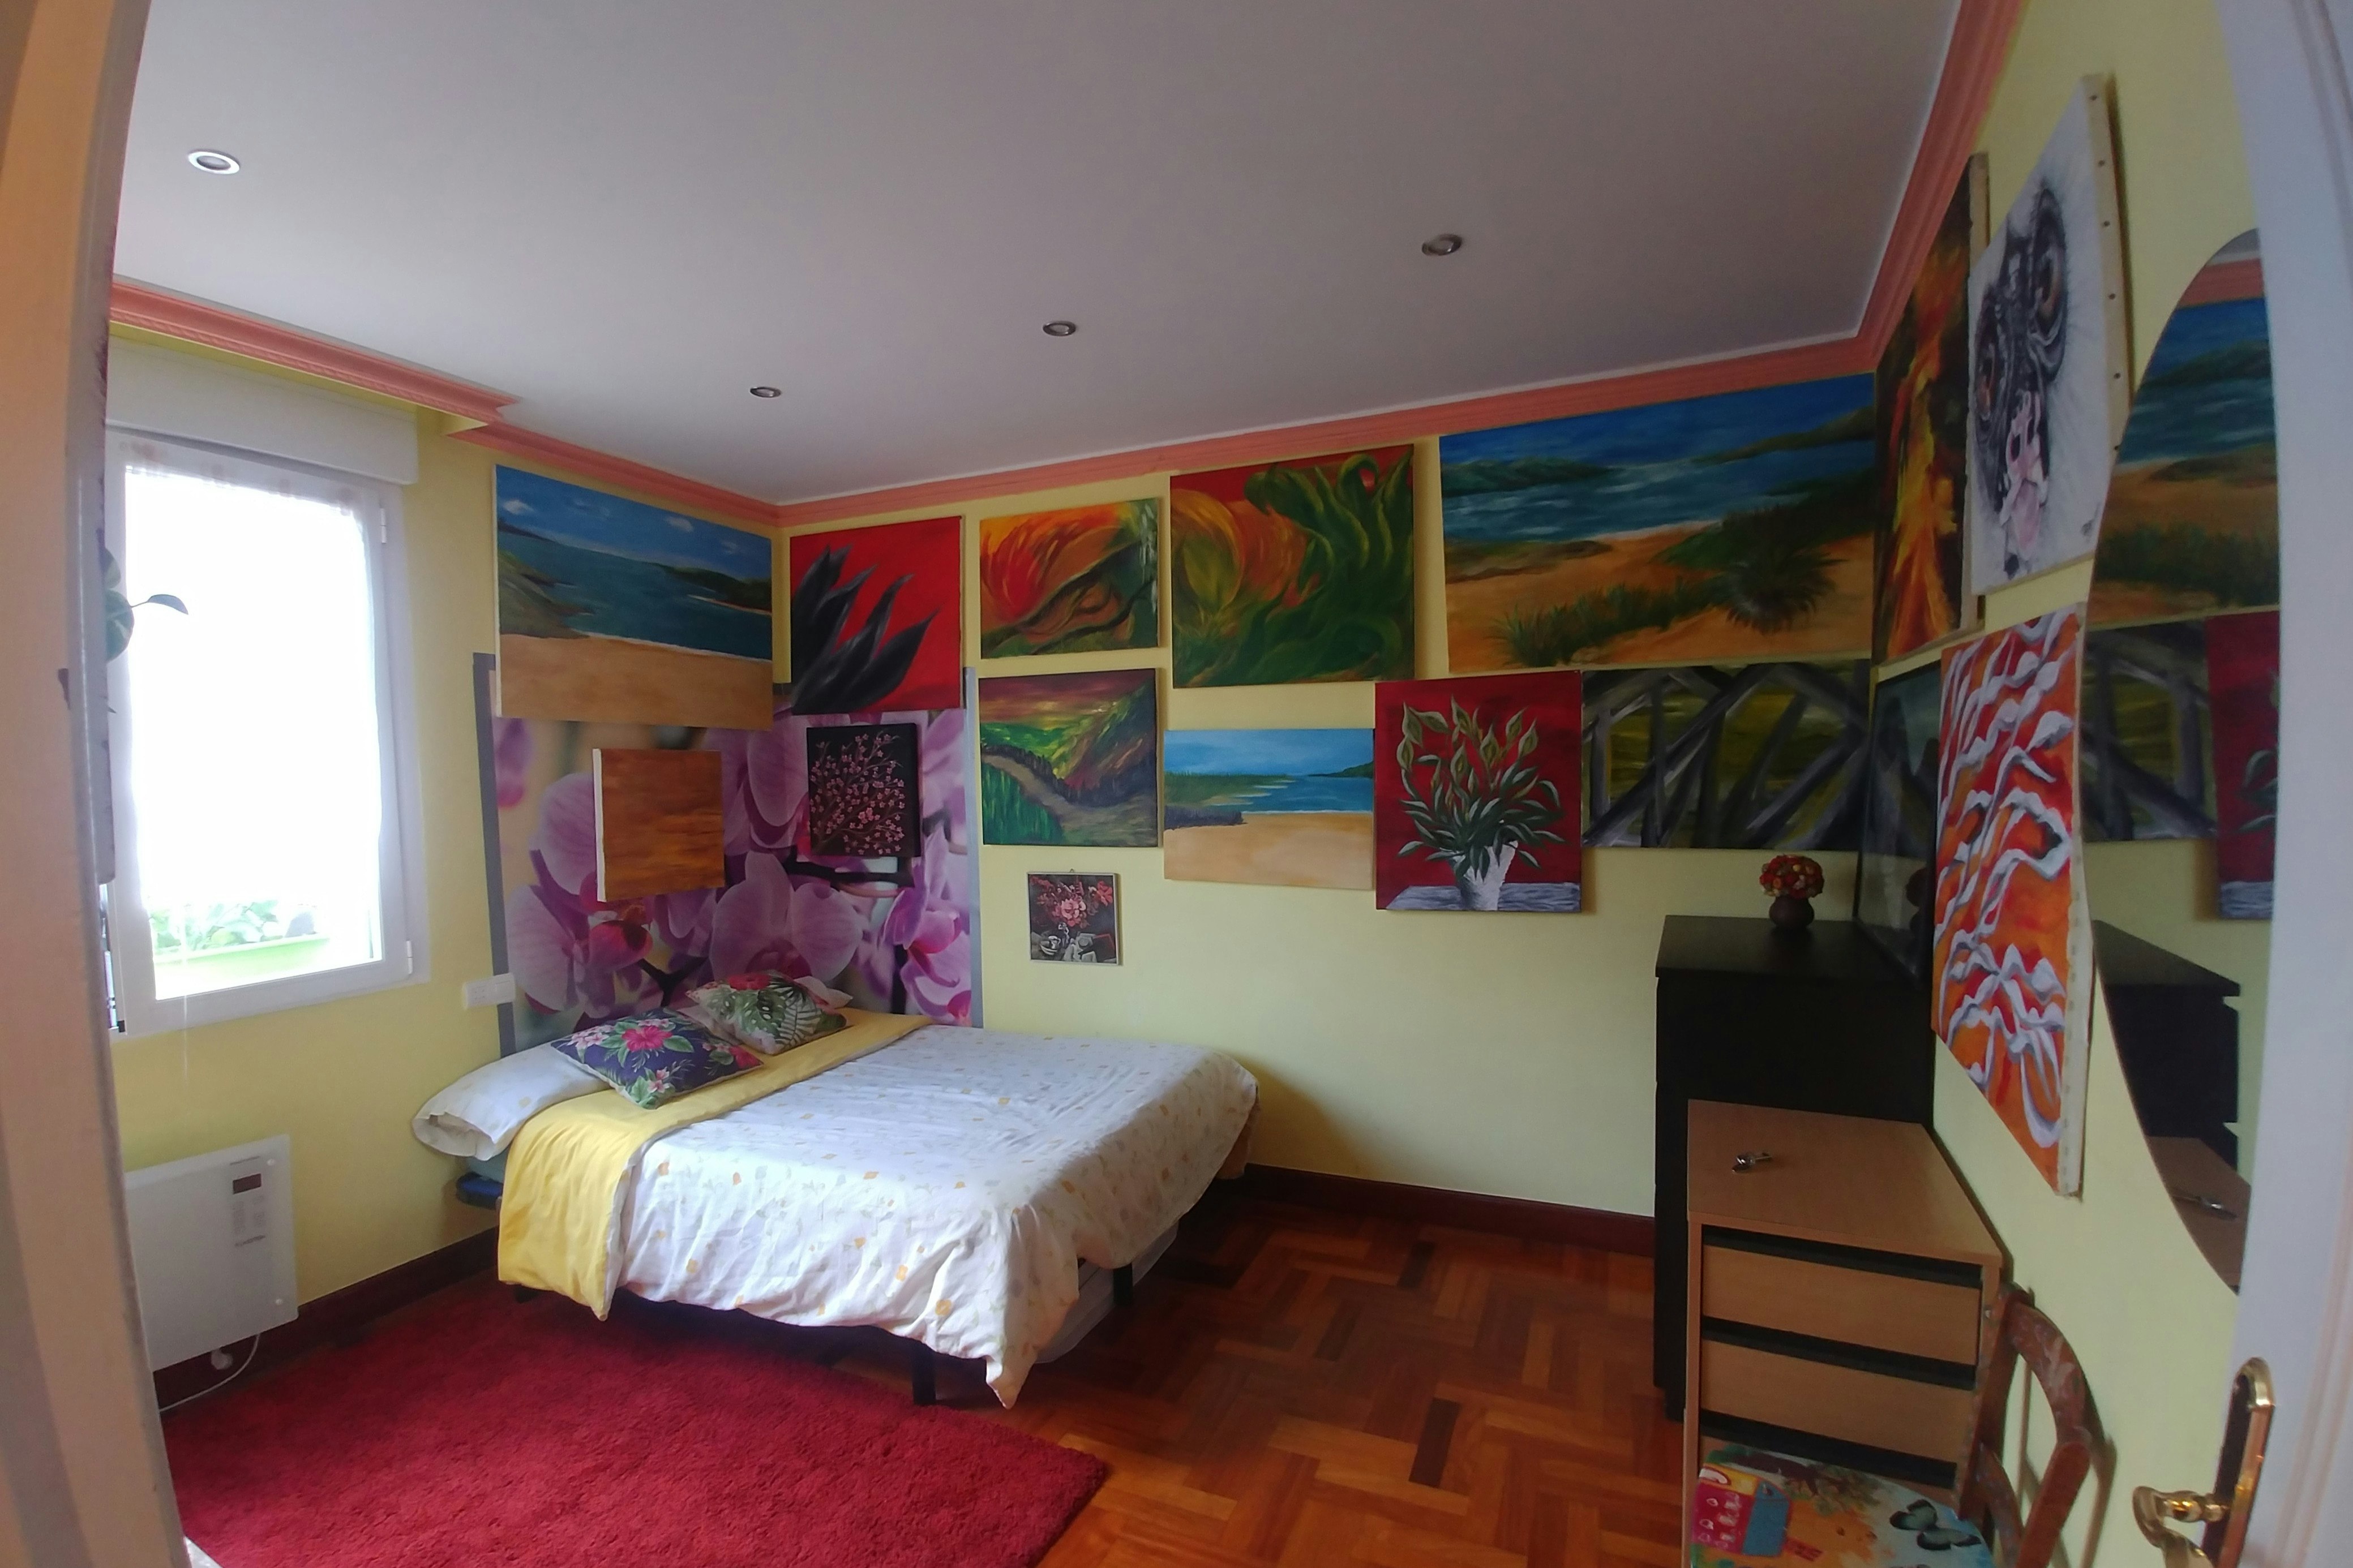 A colourful bedroom in Bilbao